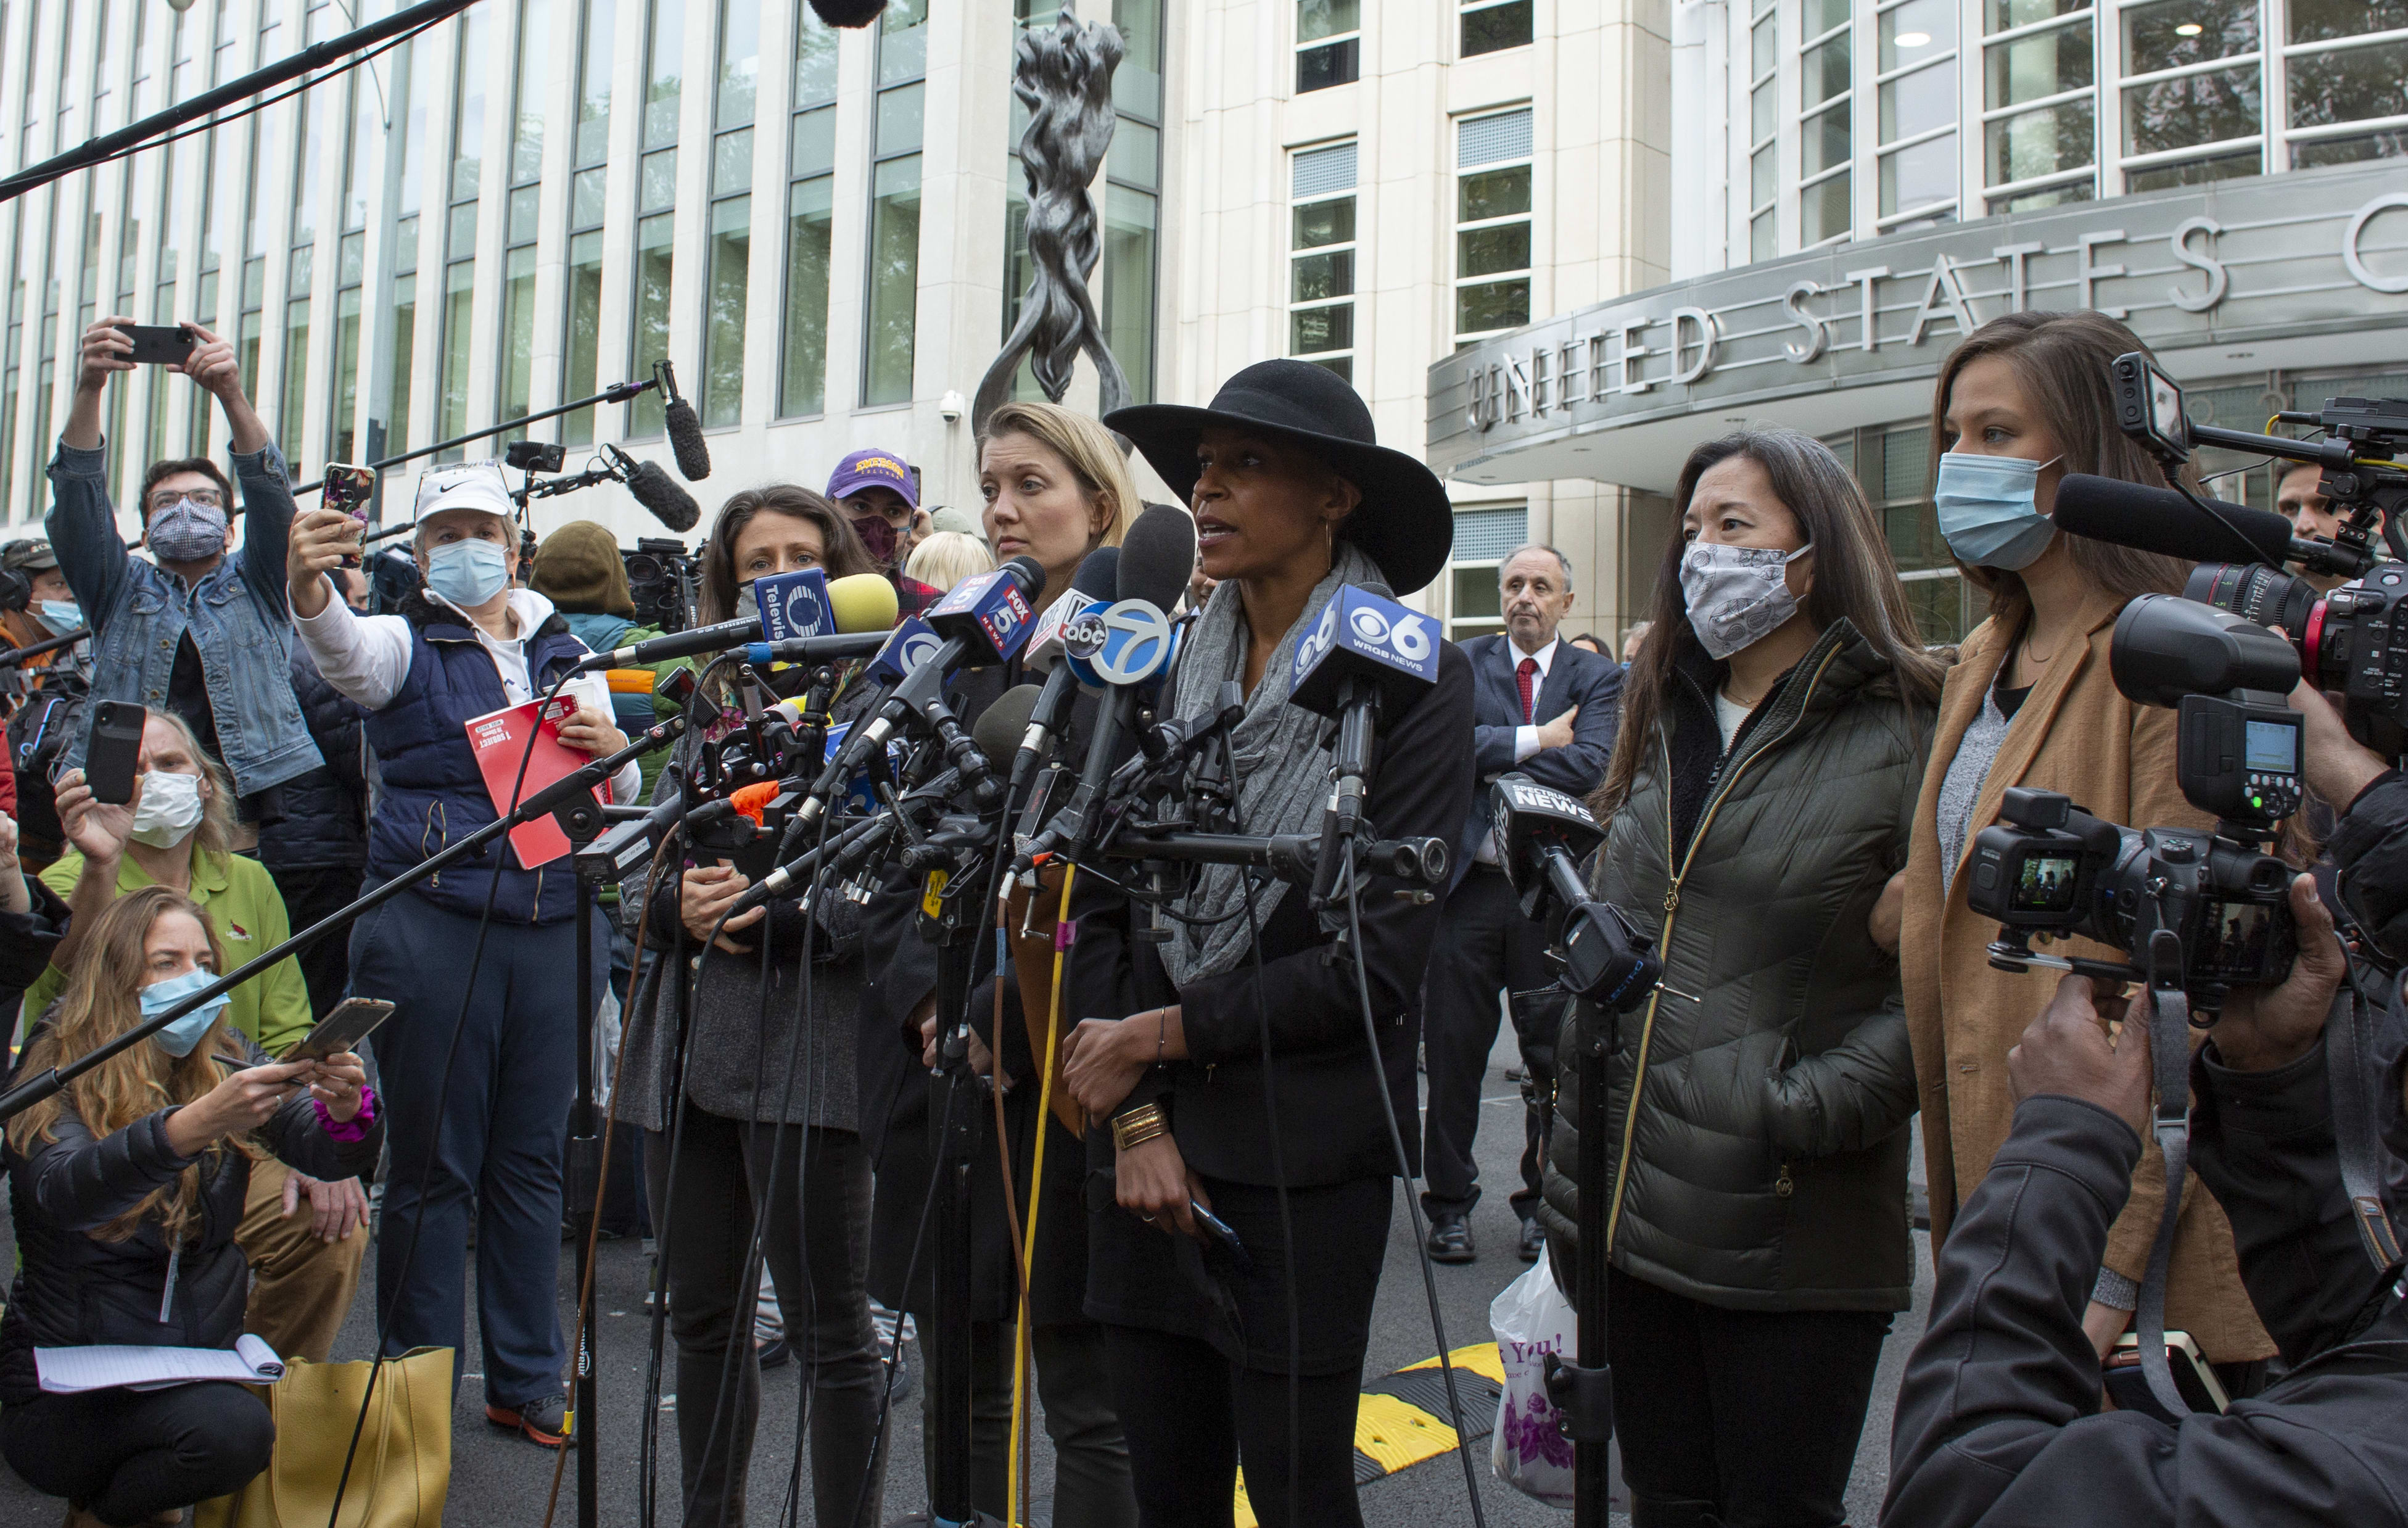 Former members of Nxivm, Linda Chung (2R), Nicki Clyne (L) and Michelle Hatchette (C) speak outside the court after Keith Raniere was sentenced to 120 years in prison.